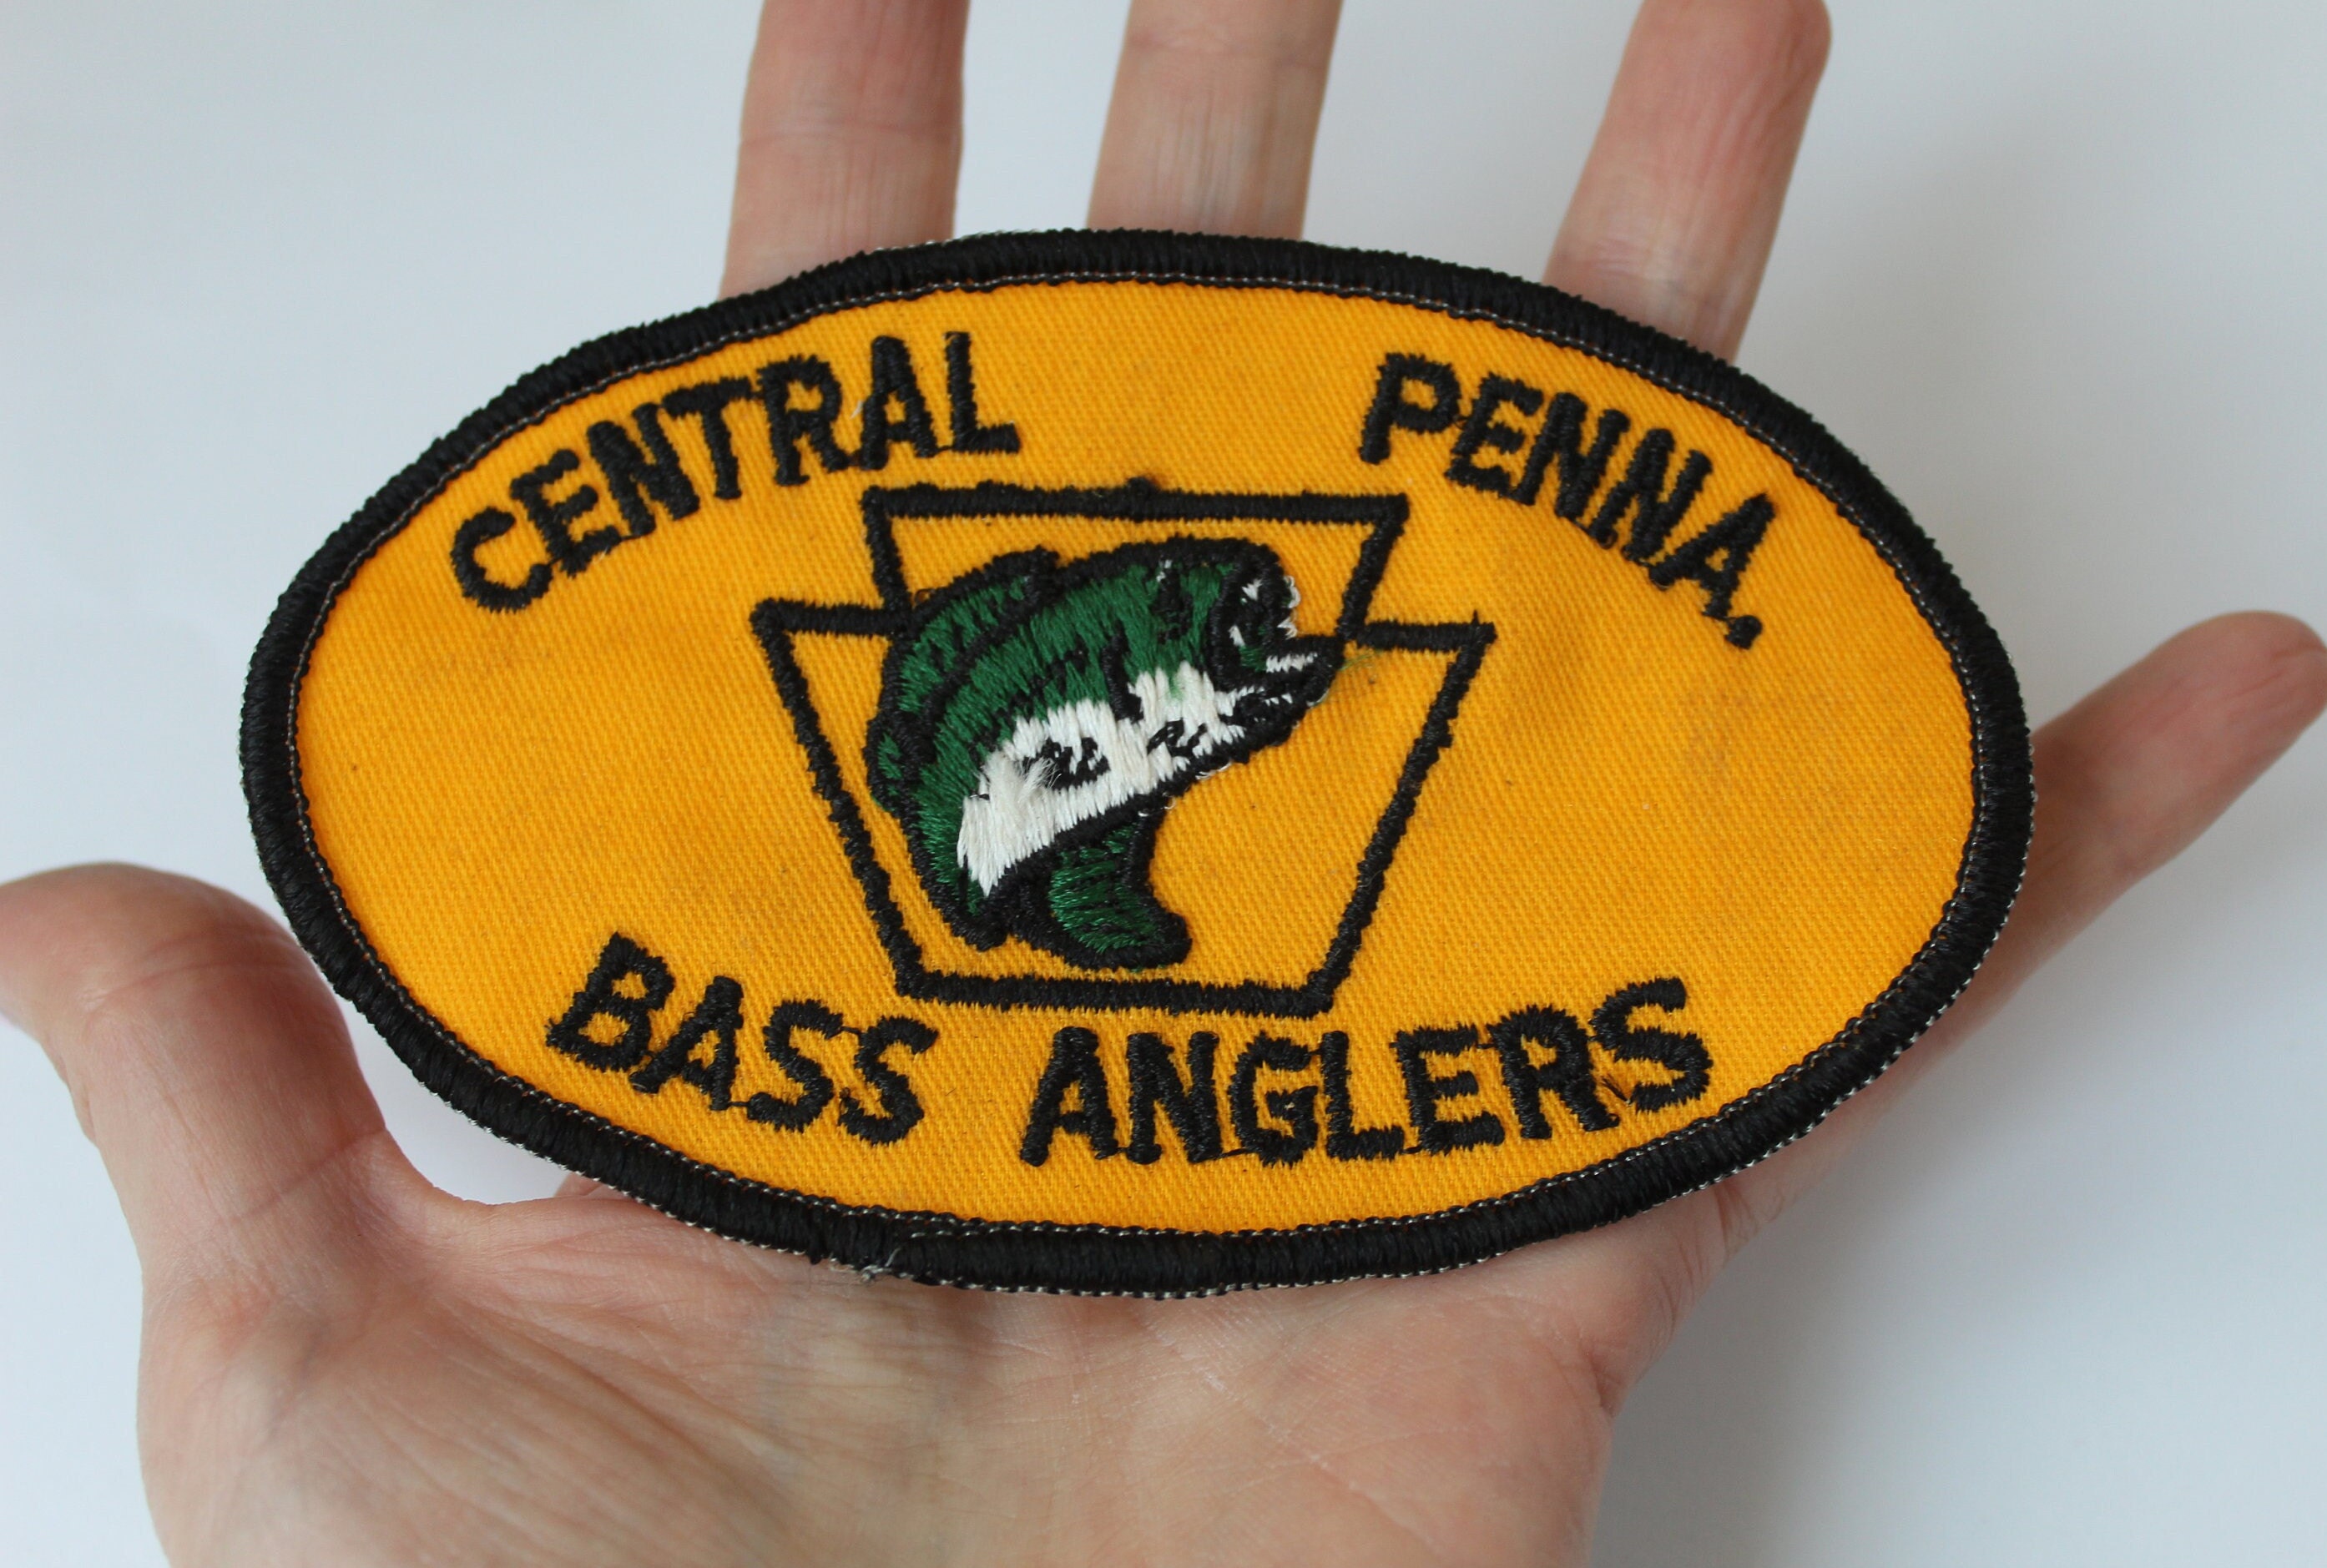 Vintage Older Fishing Patch Pennsylvania Bass Anglers, Old Cheesecloth  Backing, Central Penna Bass Anglers Unused Patch 